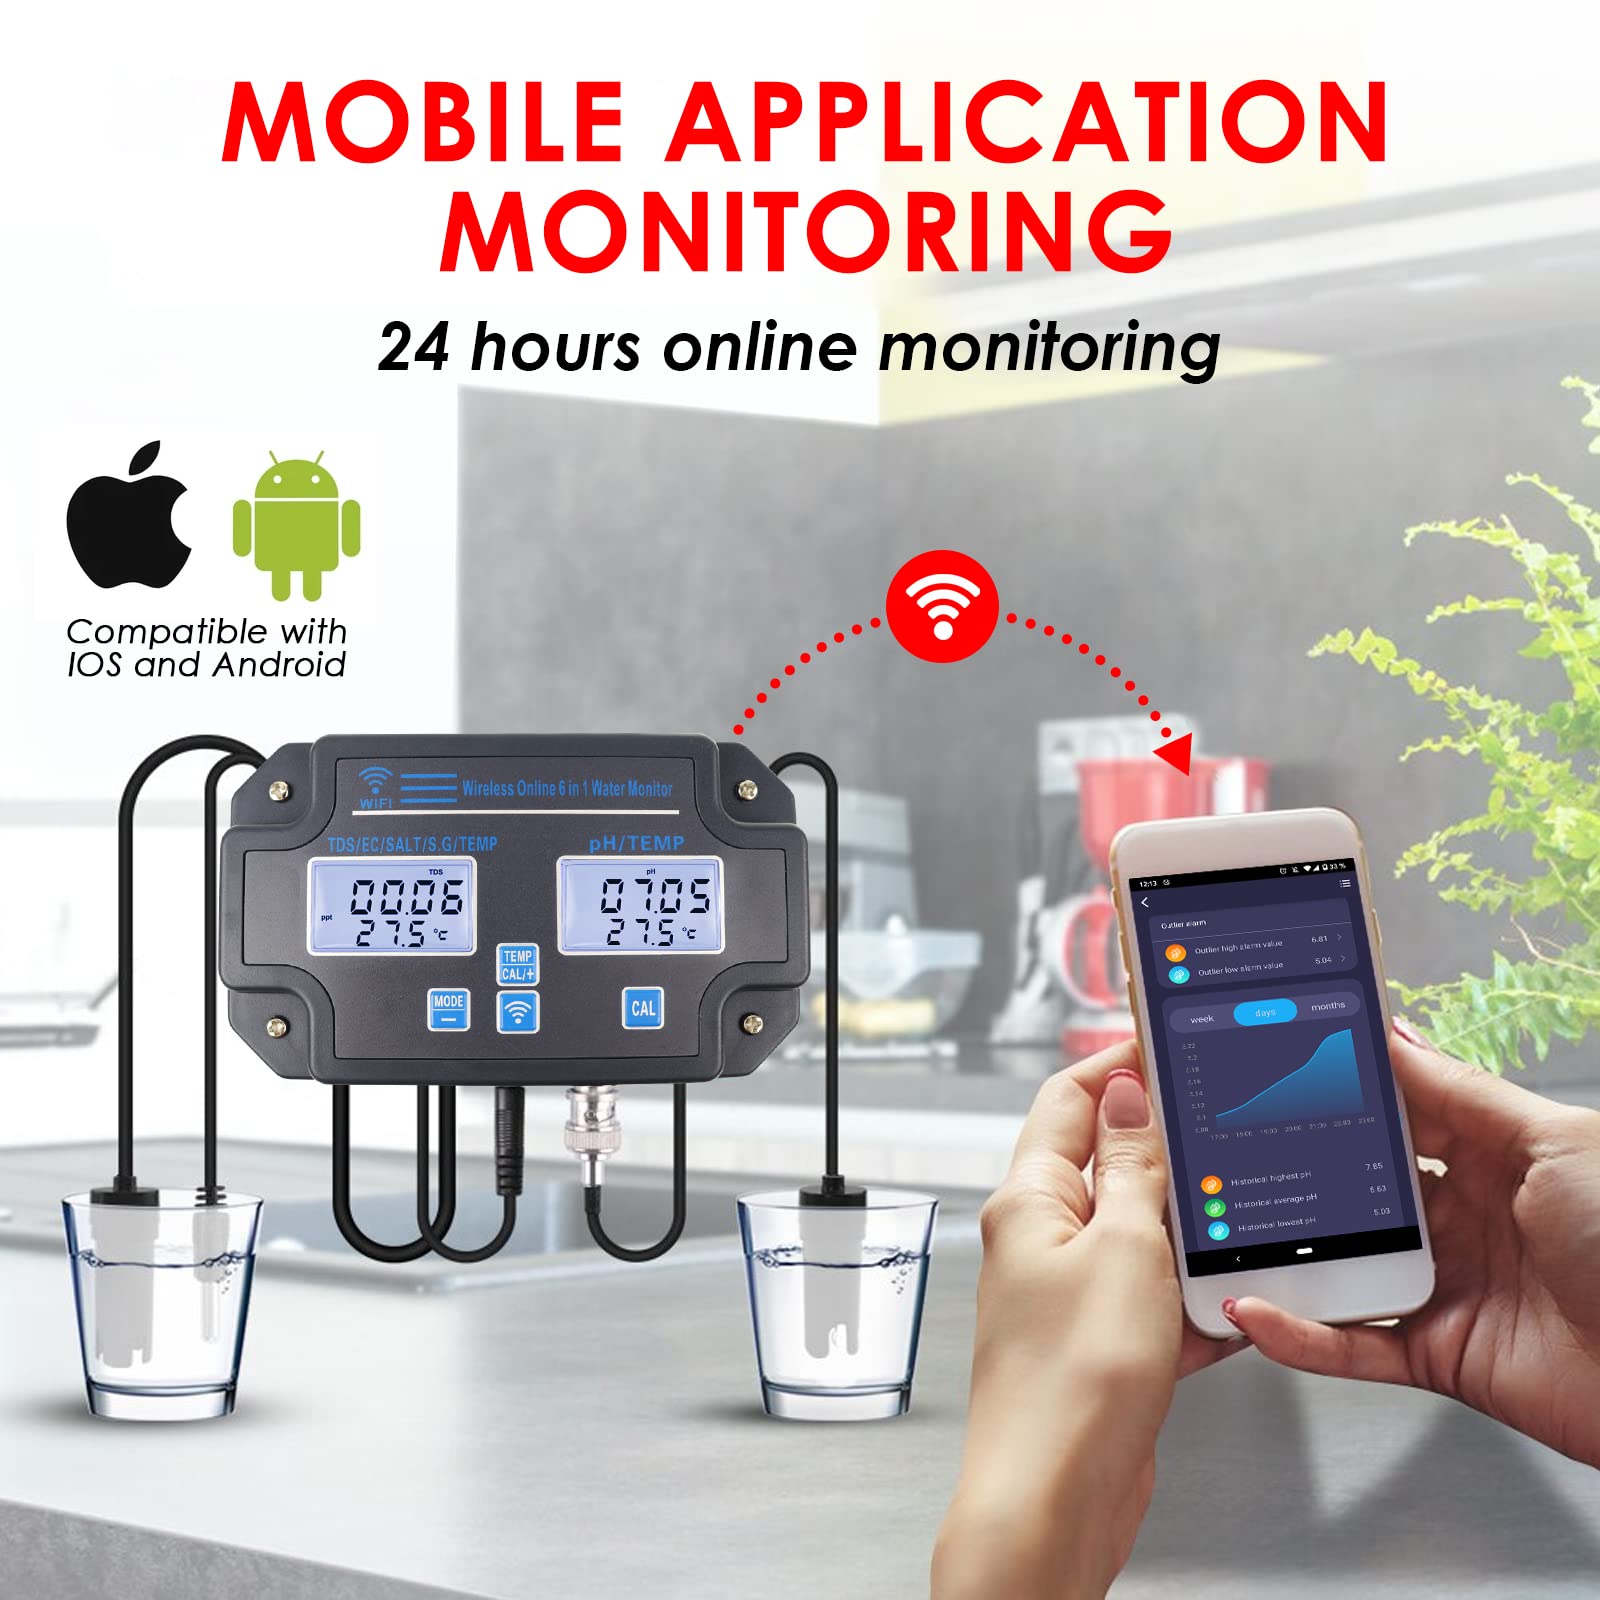 DANOPLUS Smart Water Quality Tester, 24 hrs Wireless App Monitoring of pH EC TDS Salinity SG Temperature, Mountable with Alarm Function for Aquariums & Hydroponics